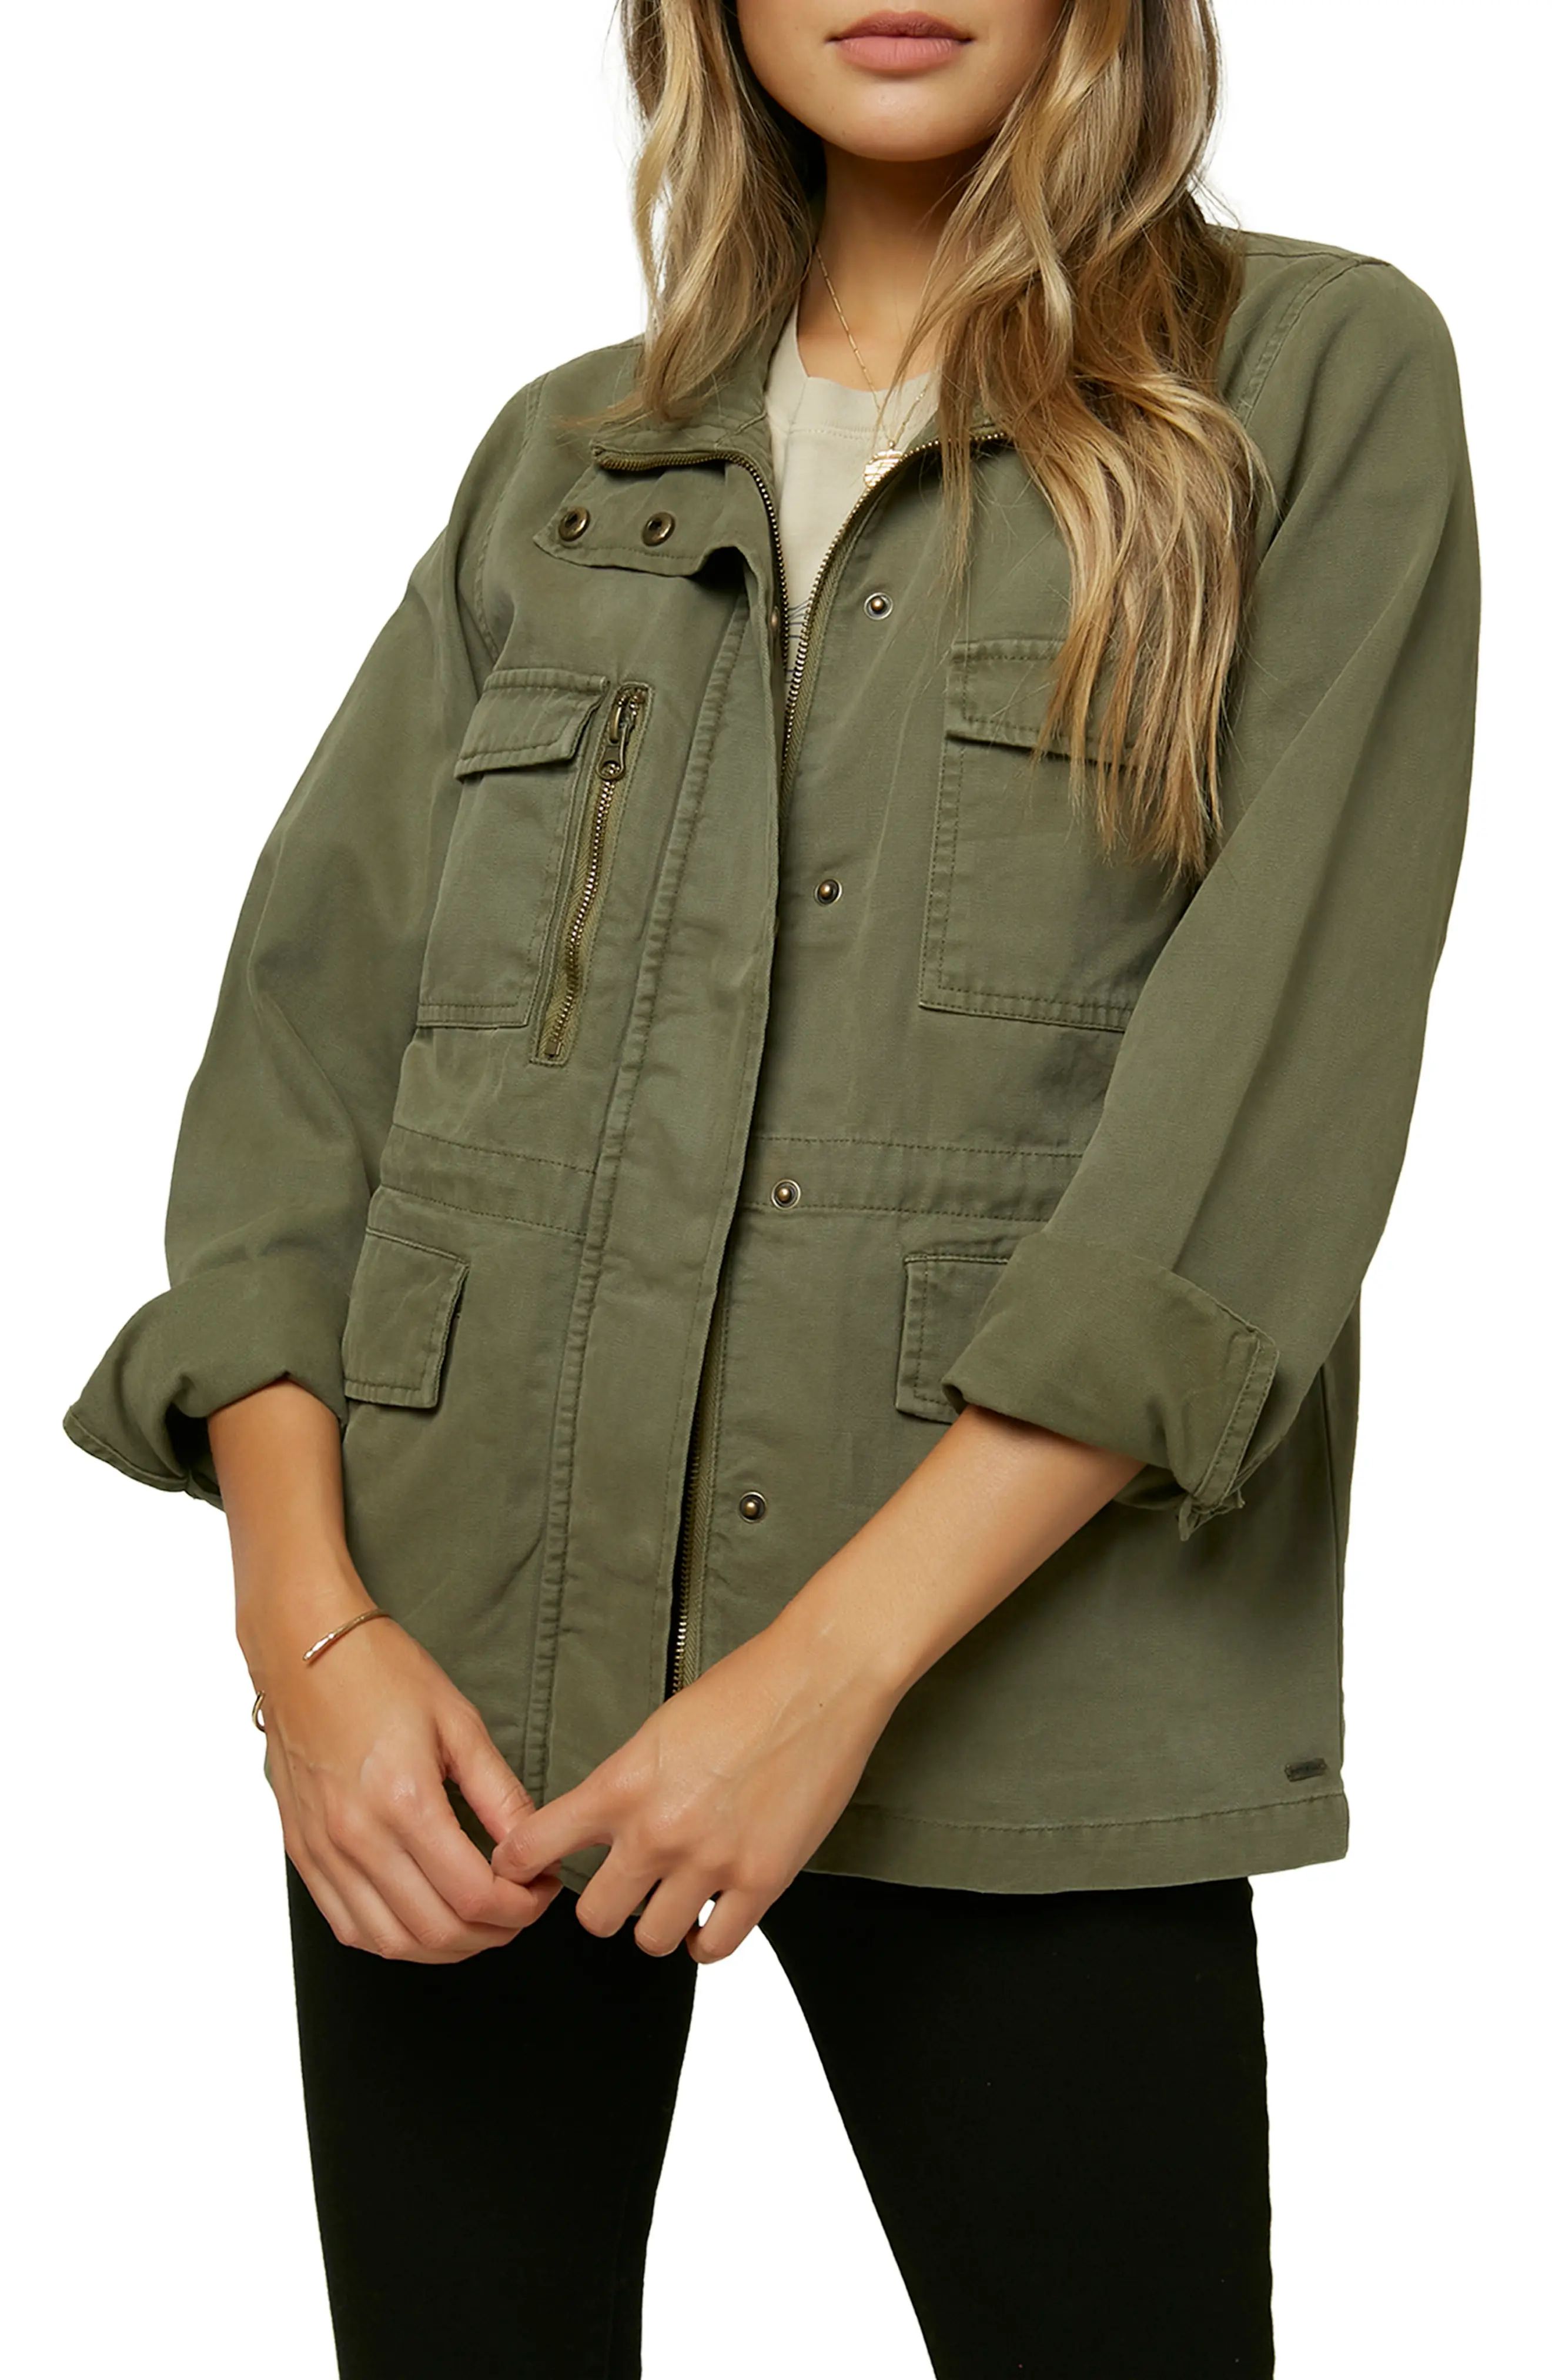 O'Neill California Army Jacket, Size Small at Nordstrom | Nordstrom